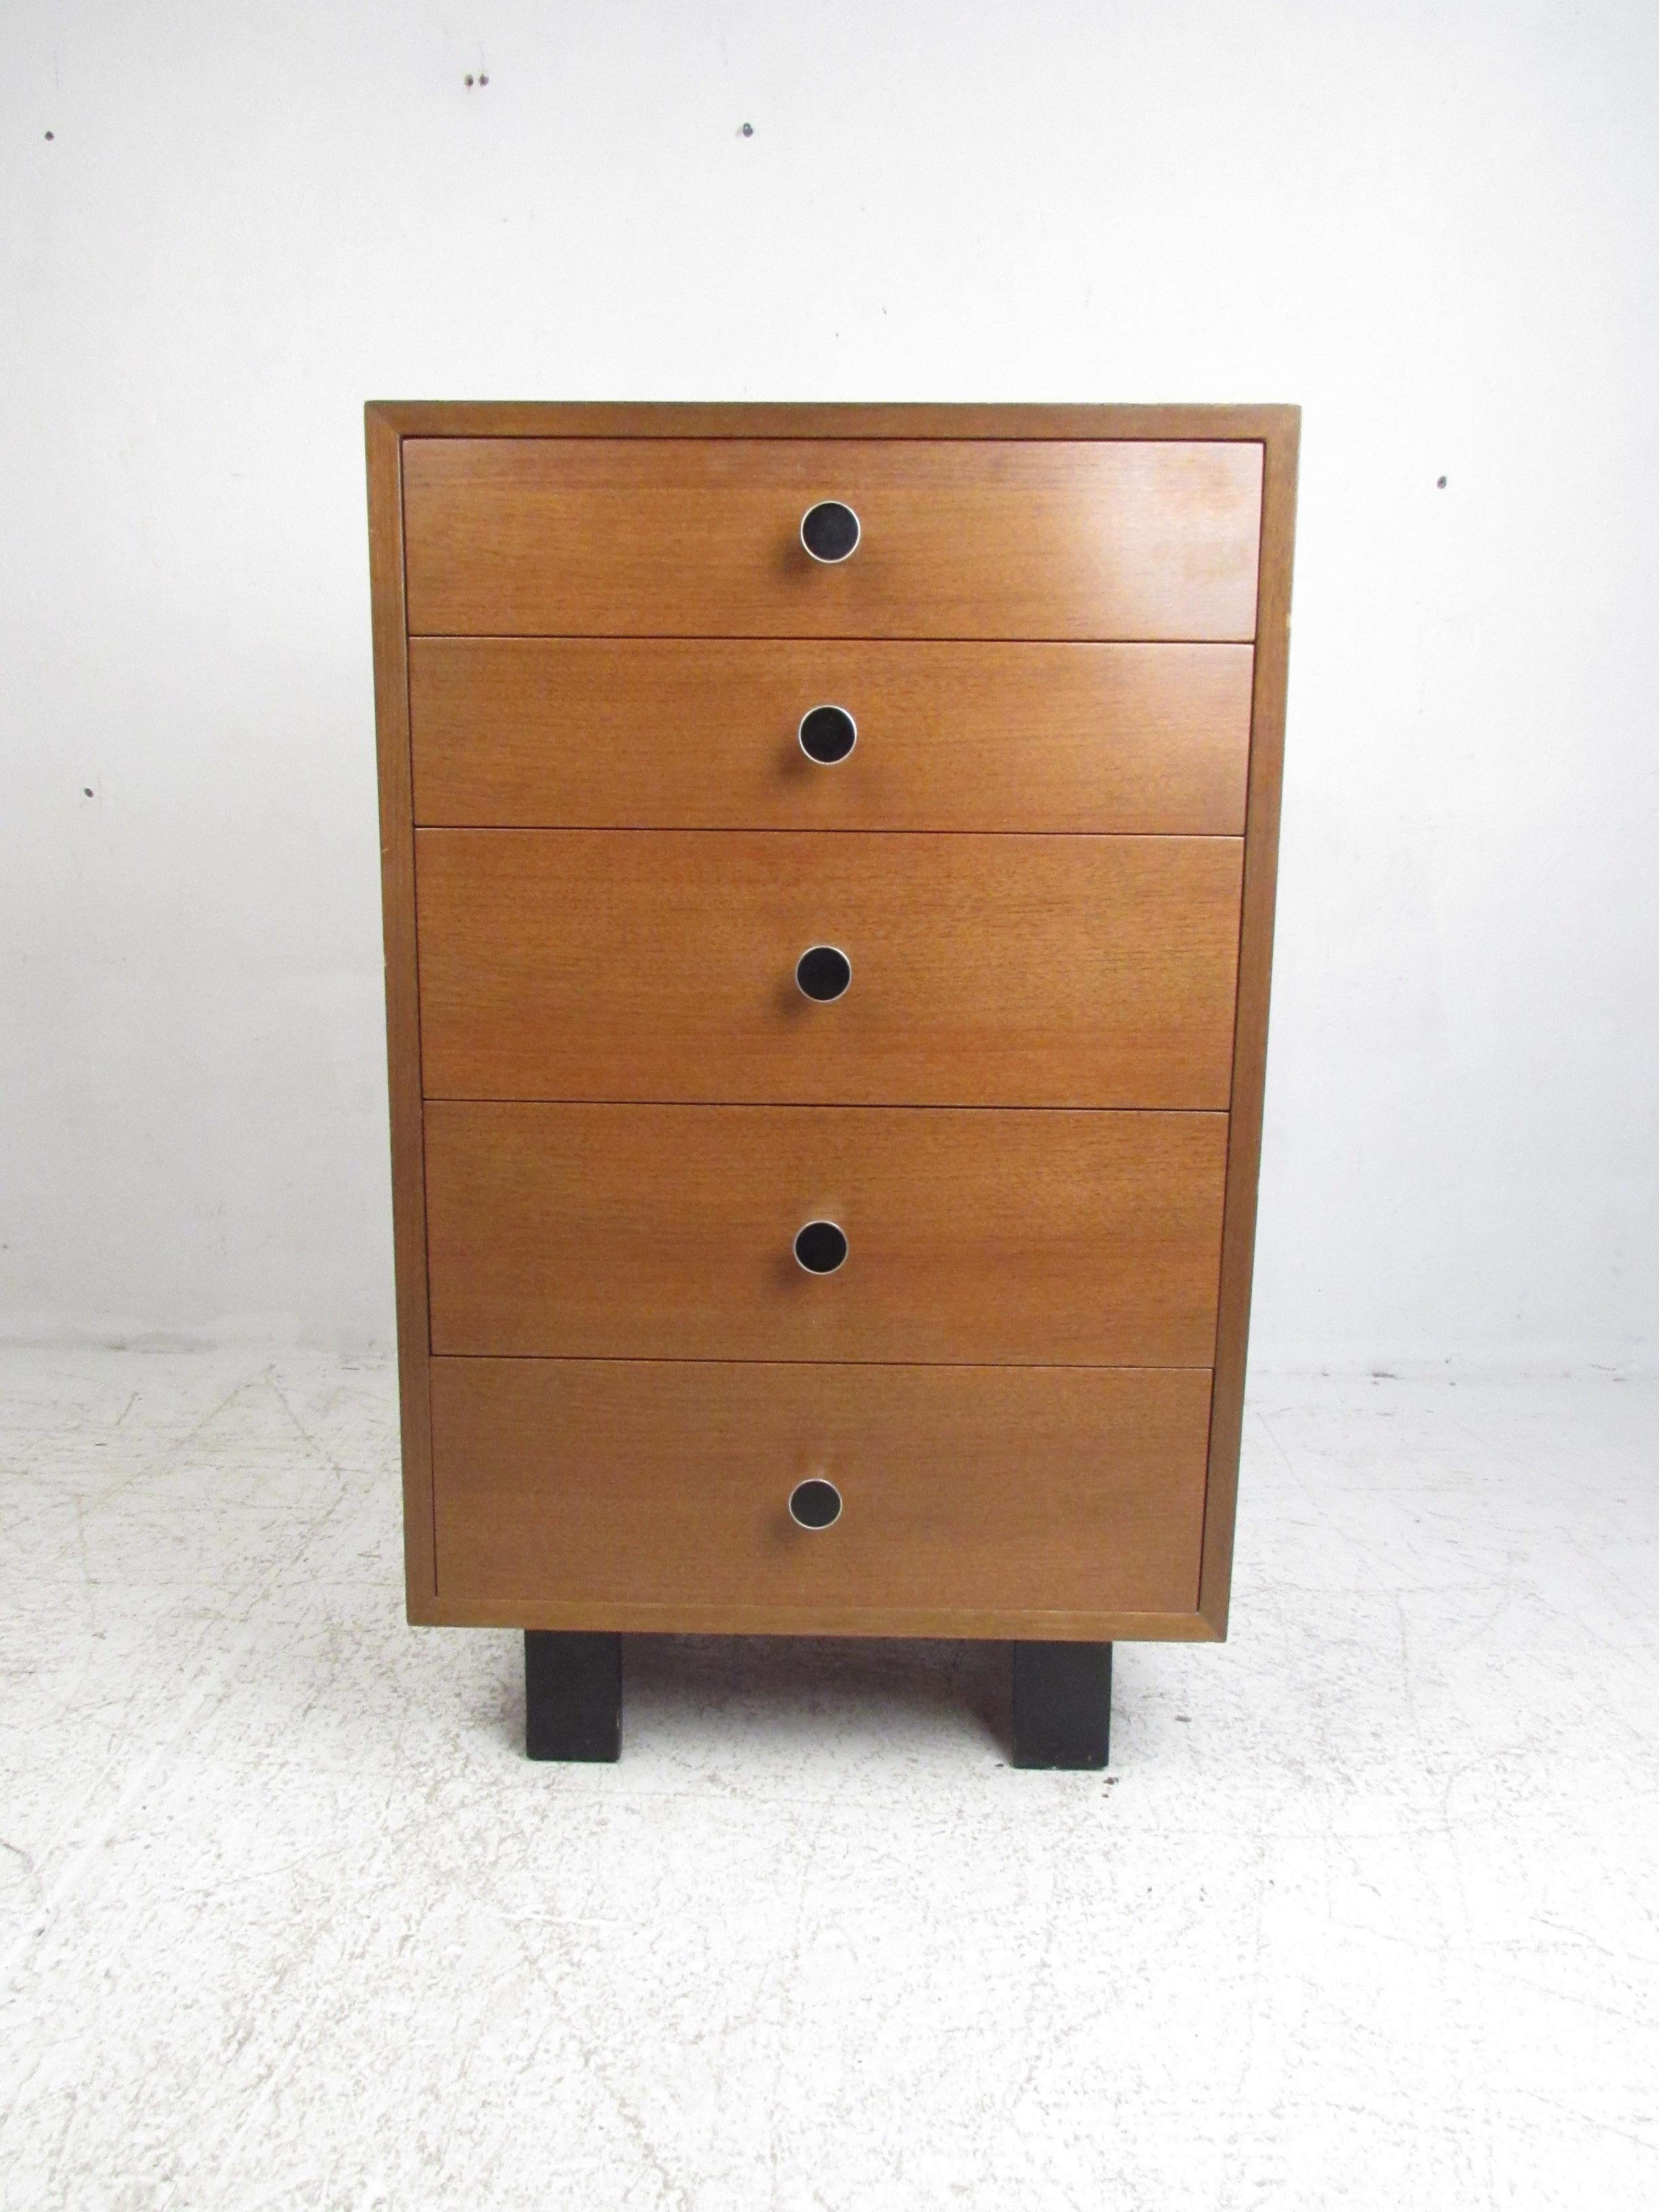 This stunning vintage modern lingerie chest features sculpted round pulls with ebonized fronts on each drawer. This stylish five-drawer chest offers plenty of room for storage within its compact design. The unusual legs show attention to detail and